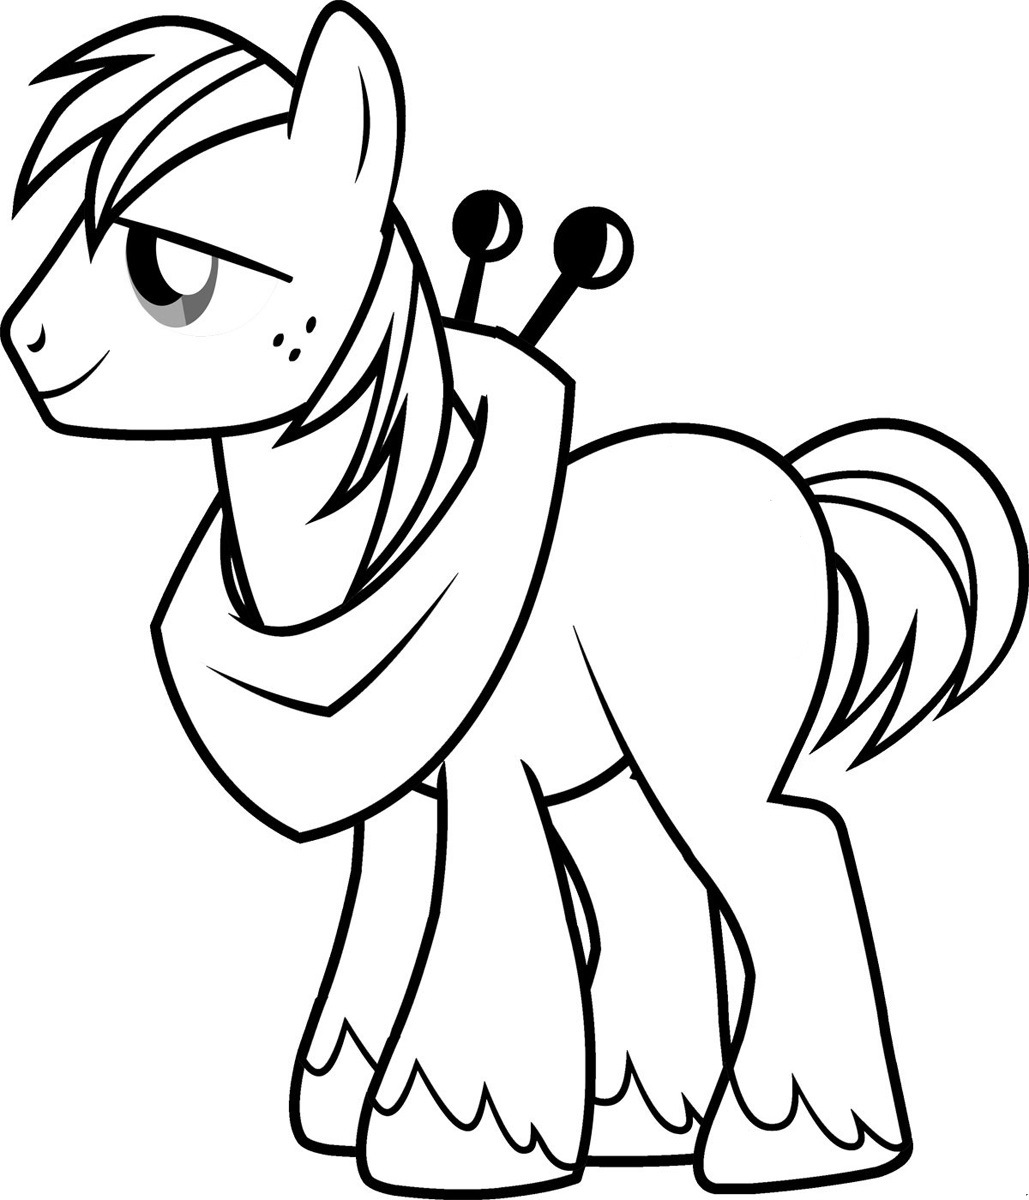 Ponies from Ponyville coloring pages, free printable ...